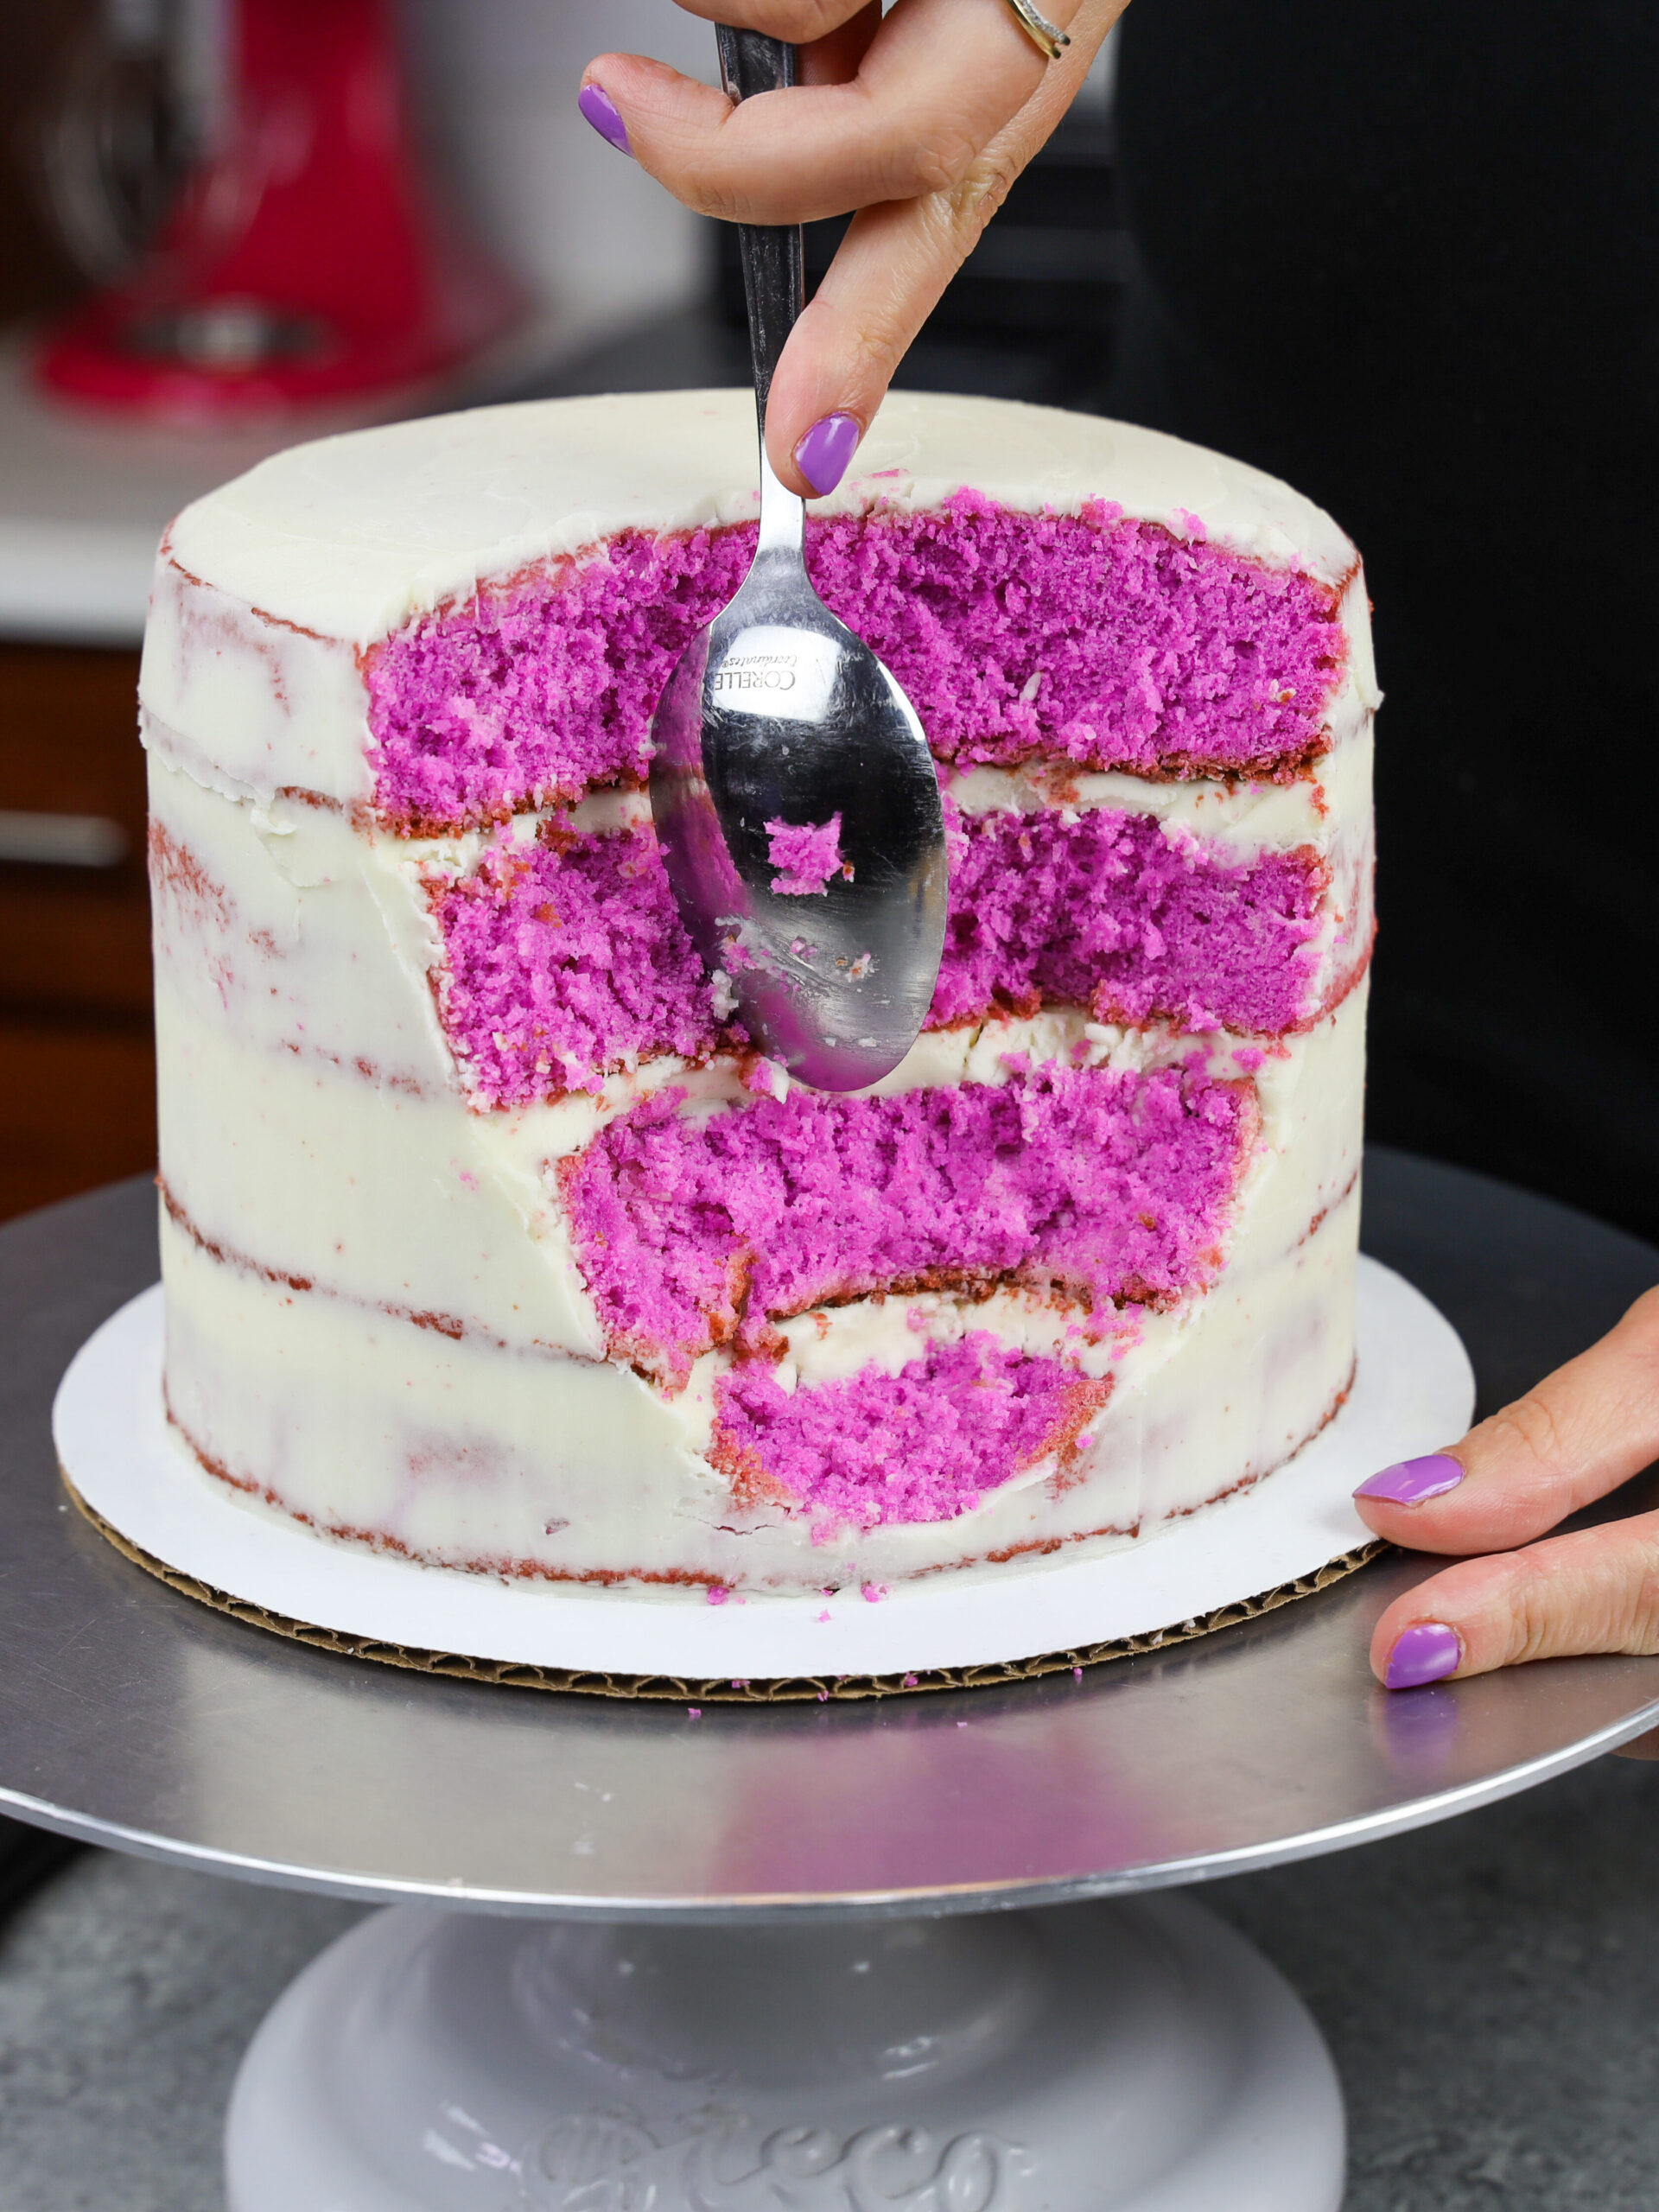 image of a cake being cut into to make a geode cake